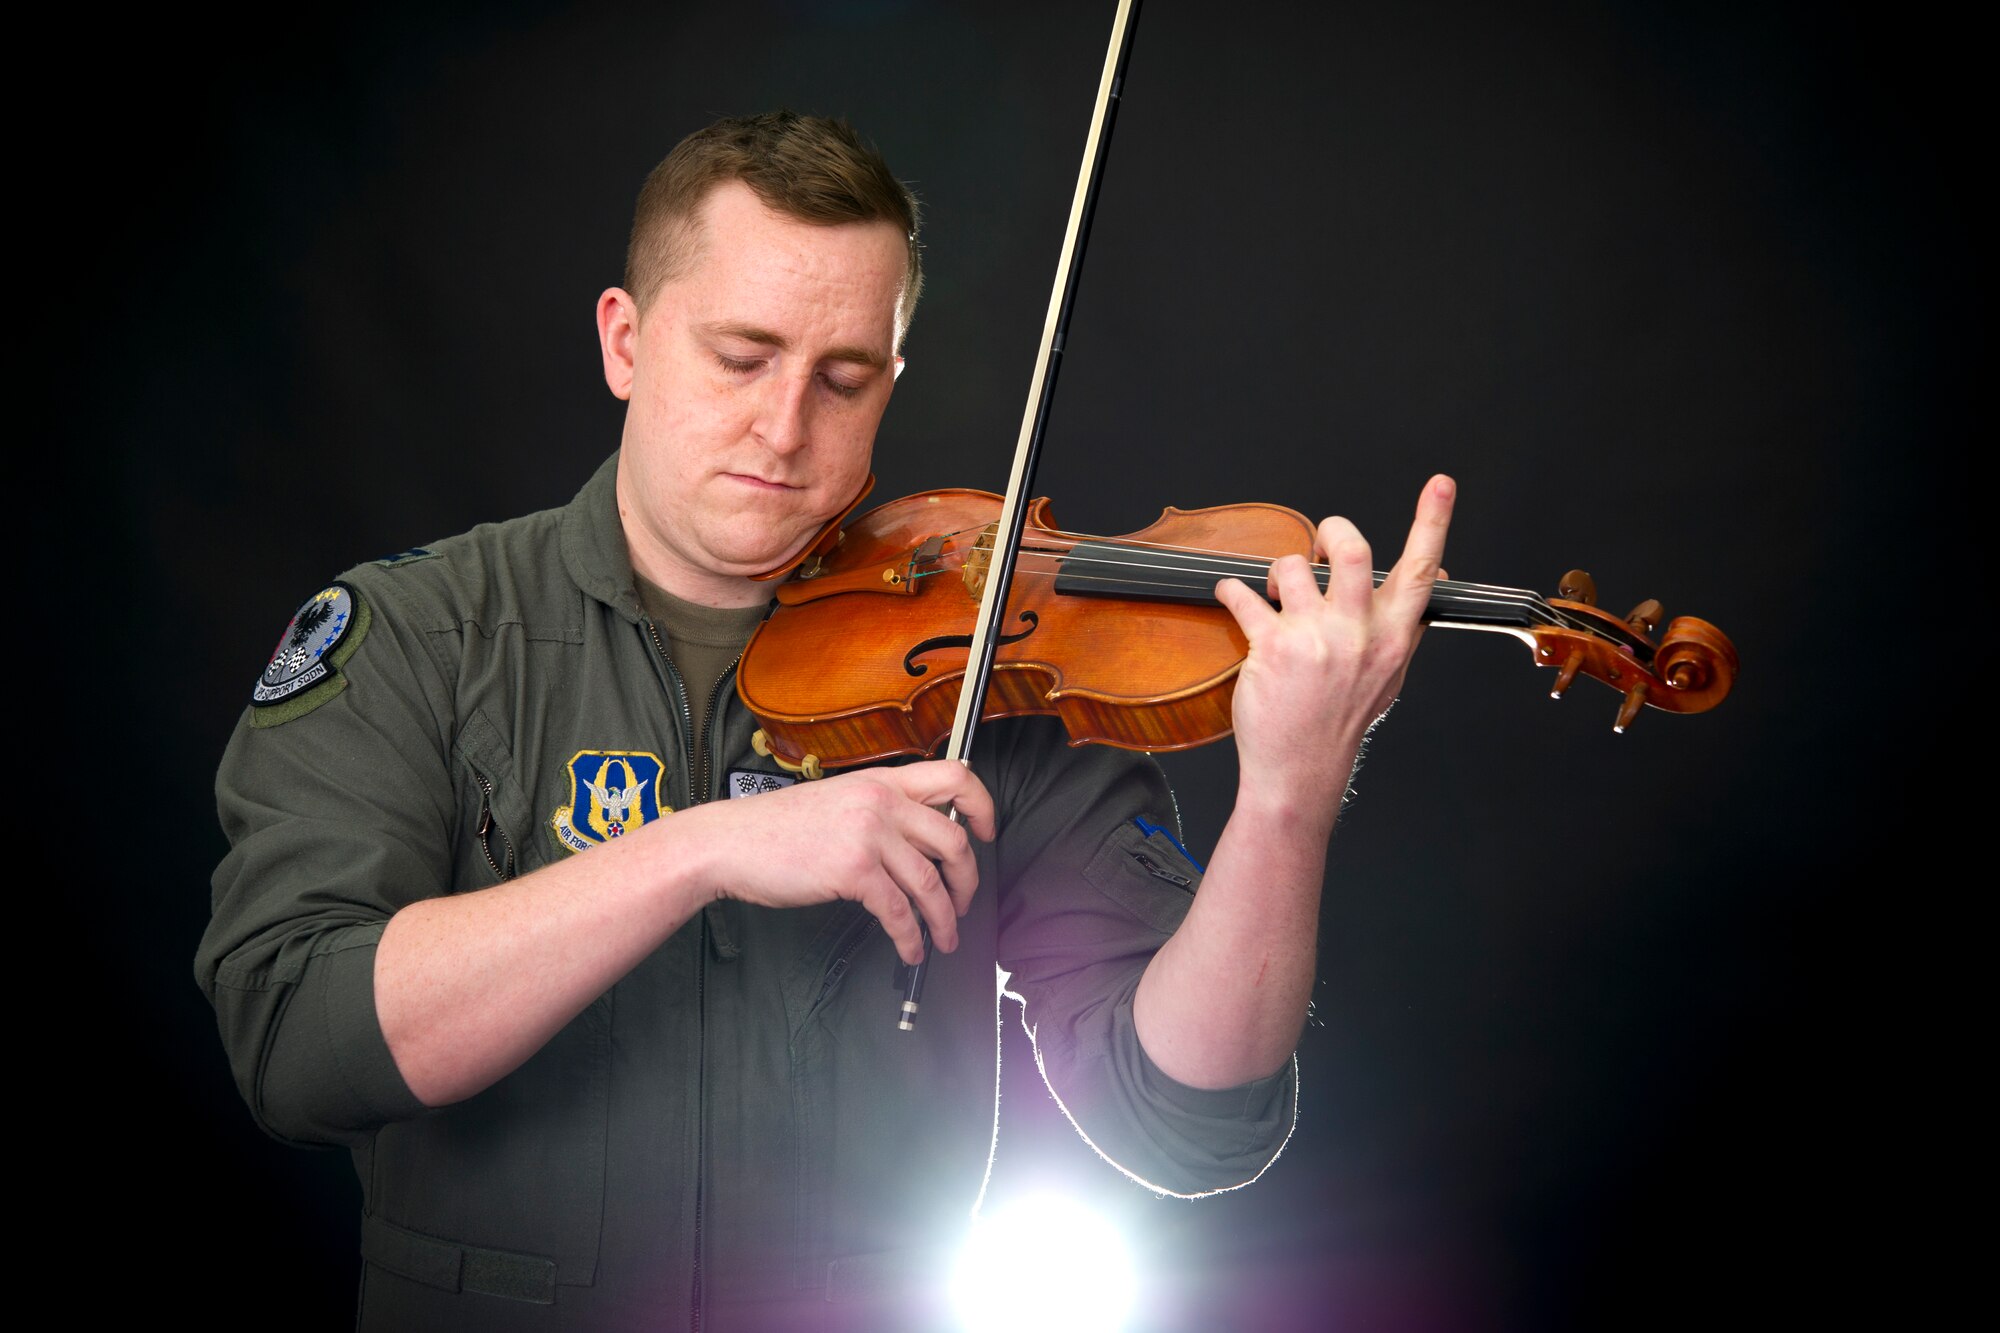 Capt. Rob Reilly, 434th Air Refueling KC-135 Stratotanker pilot, conducts a violin performance during a demonstration at Grissom Air Reserve Base, Indiana, Jan. 29, 2021. In addition to being a tanker pilot, Reilly sits as a first chair violinist with the Indinapolis Philharmonic Orchestra. (U.S. Air Force photo/Master Sgt. Benjamin Mota)